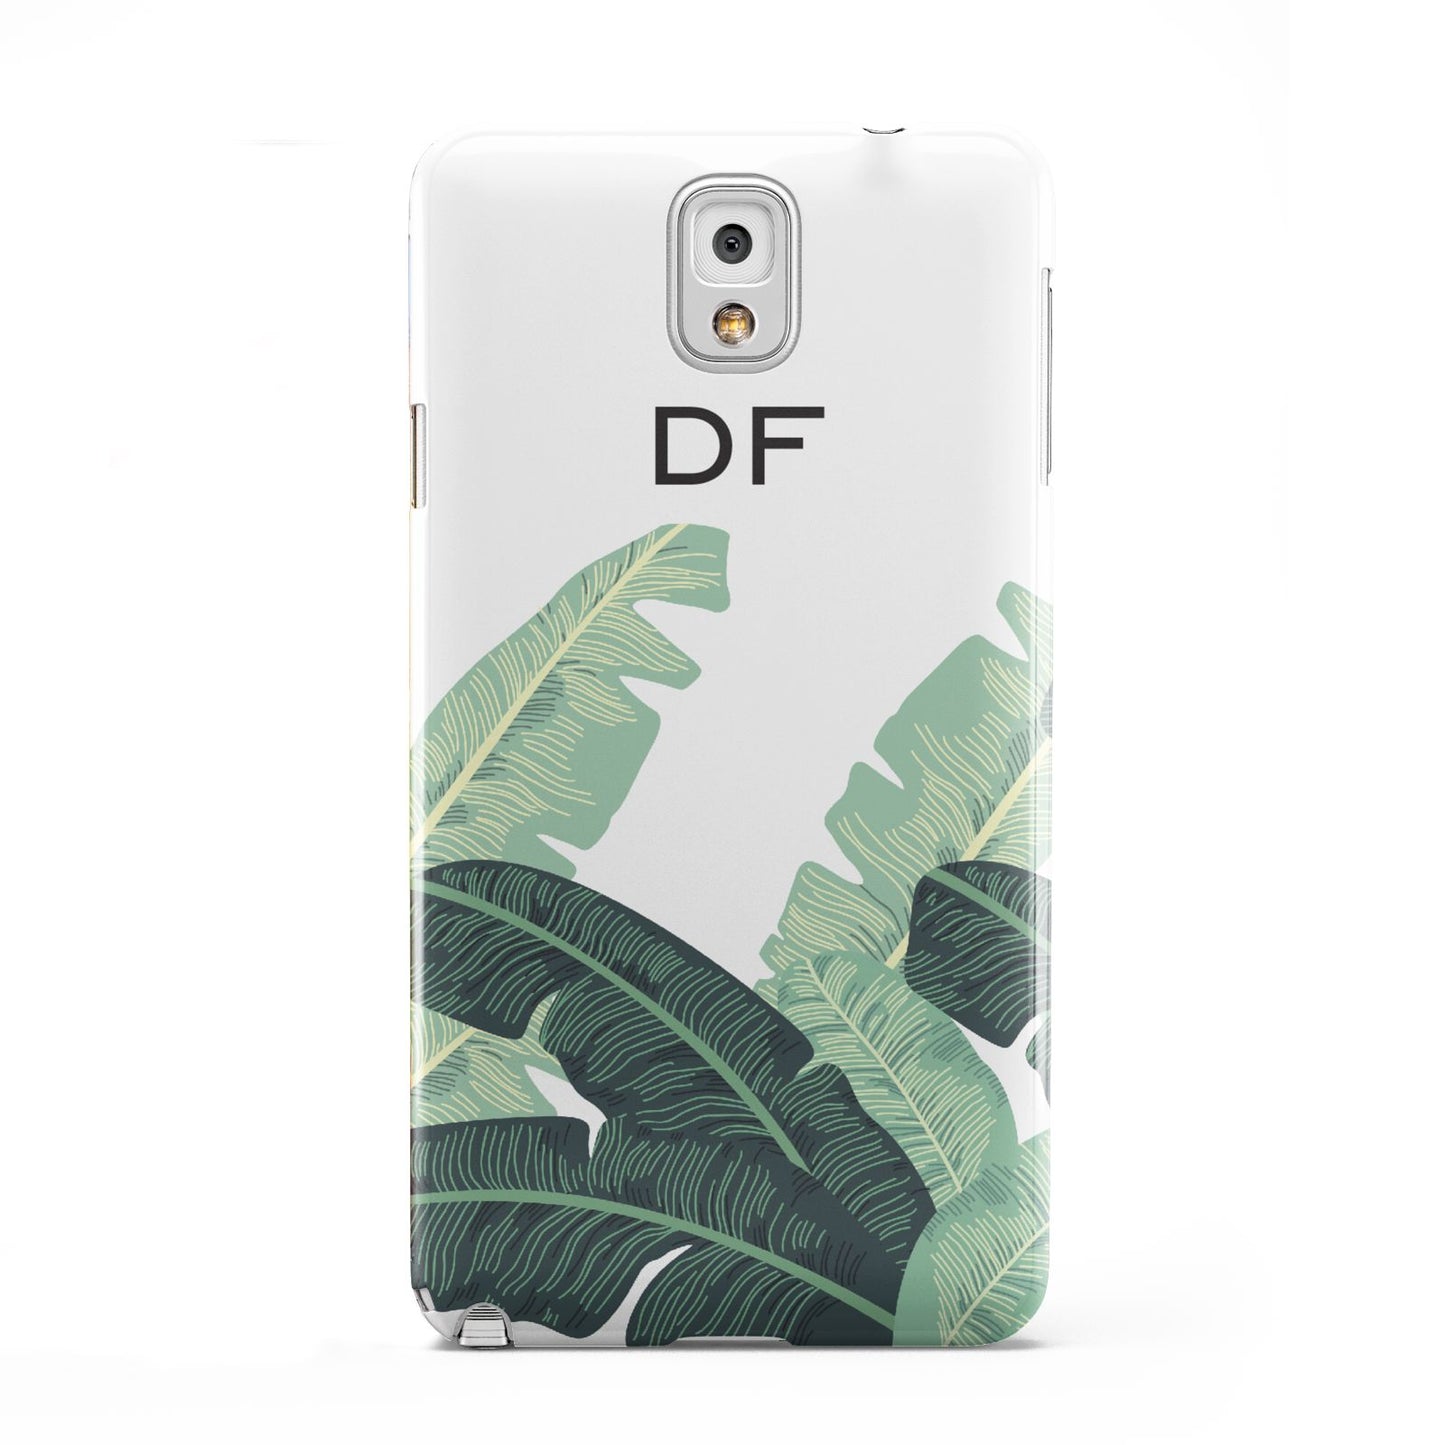 Personalised White Banana Leaf Samsung Galaxy Note 3 Case